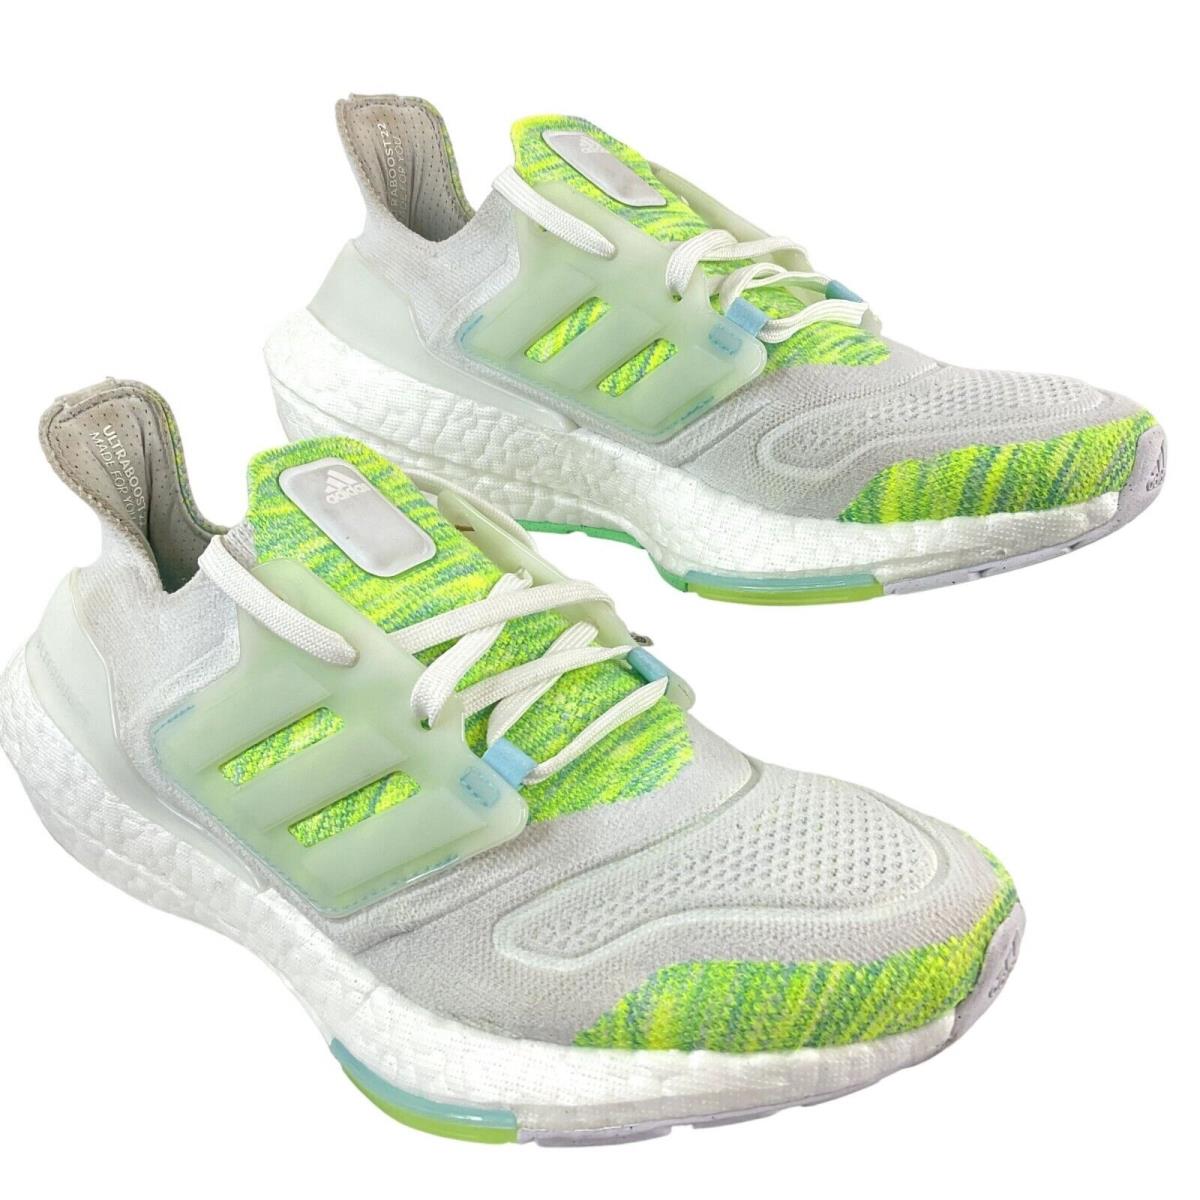 Adidas Shoes Womens Size 8 White Neon Green Running Ultraboost 22 Cushion